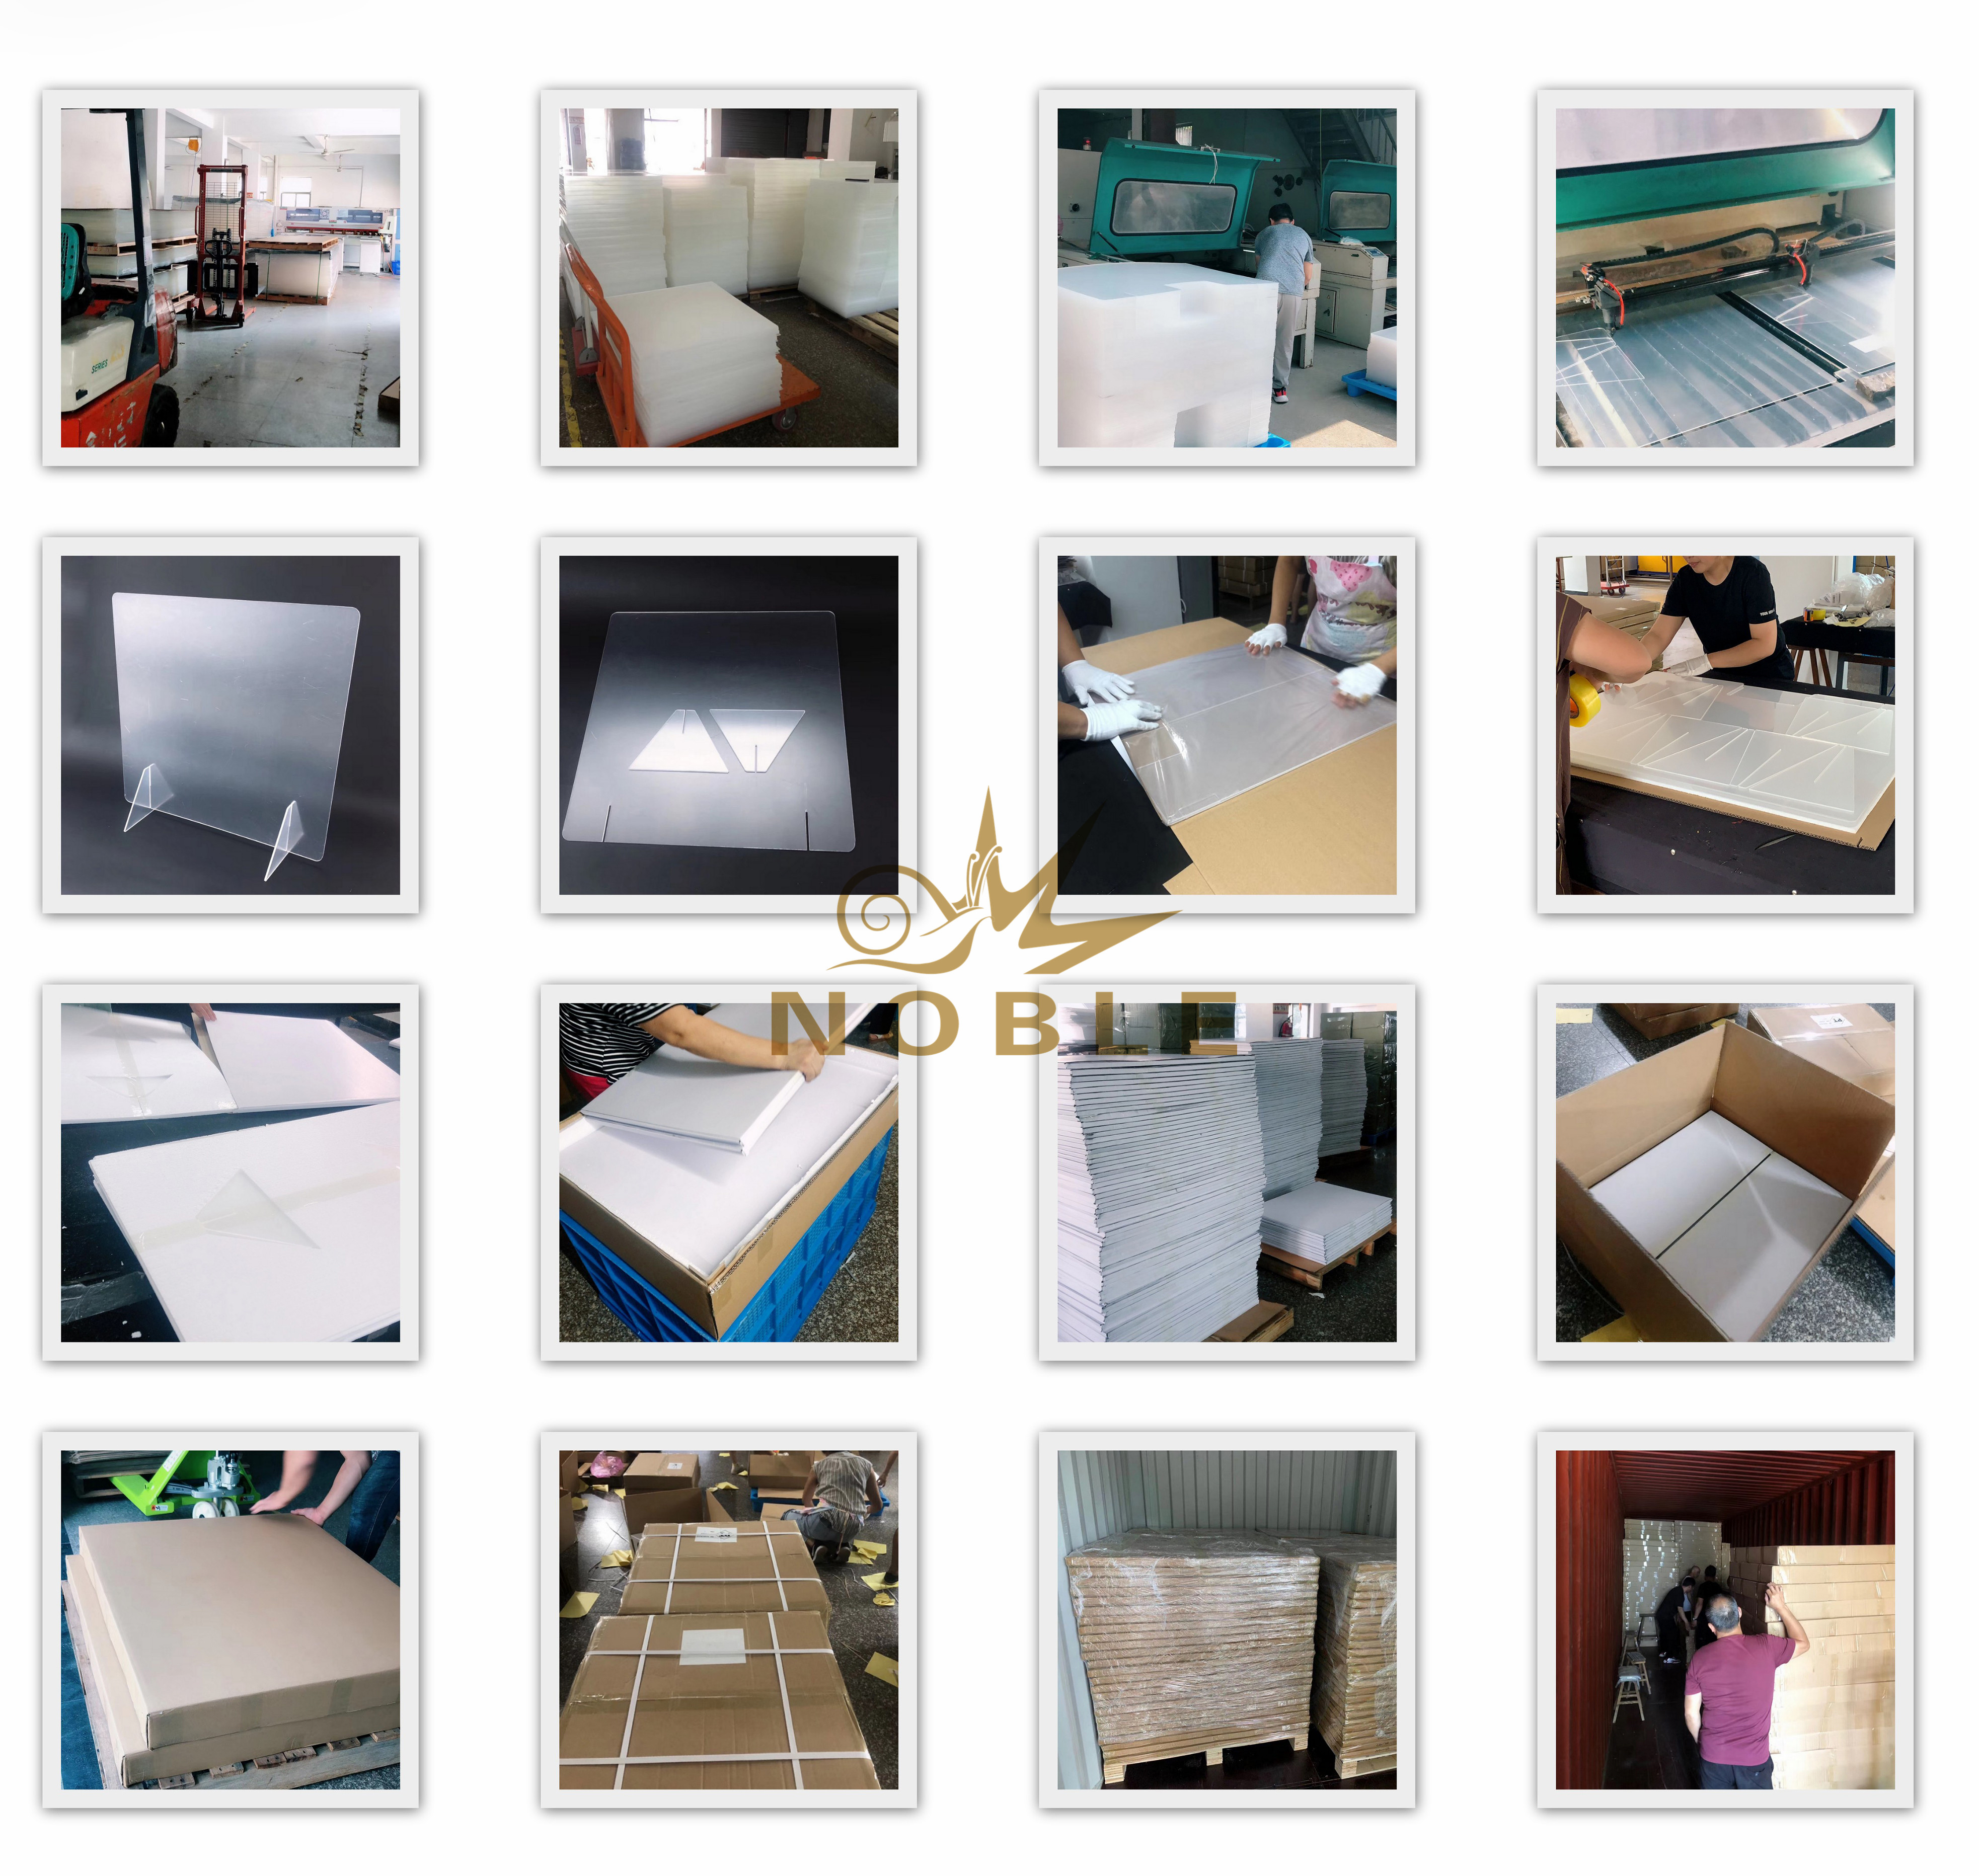 Acrylic Protective Table Sneeze Guard for Public Transportation for Shops,Offices,Schools,Banks Restaurant,Nail Salons,etc